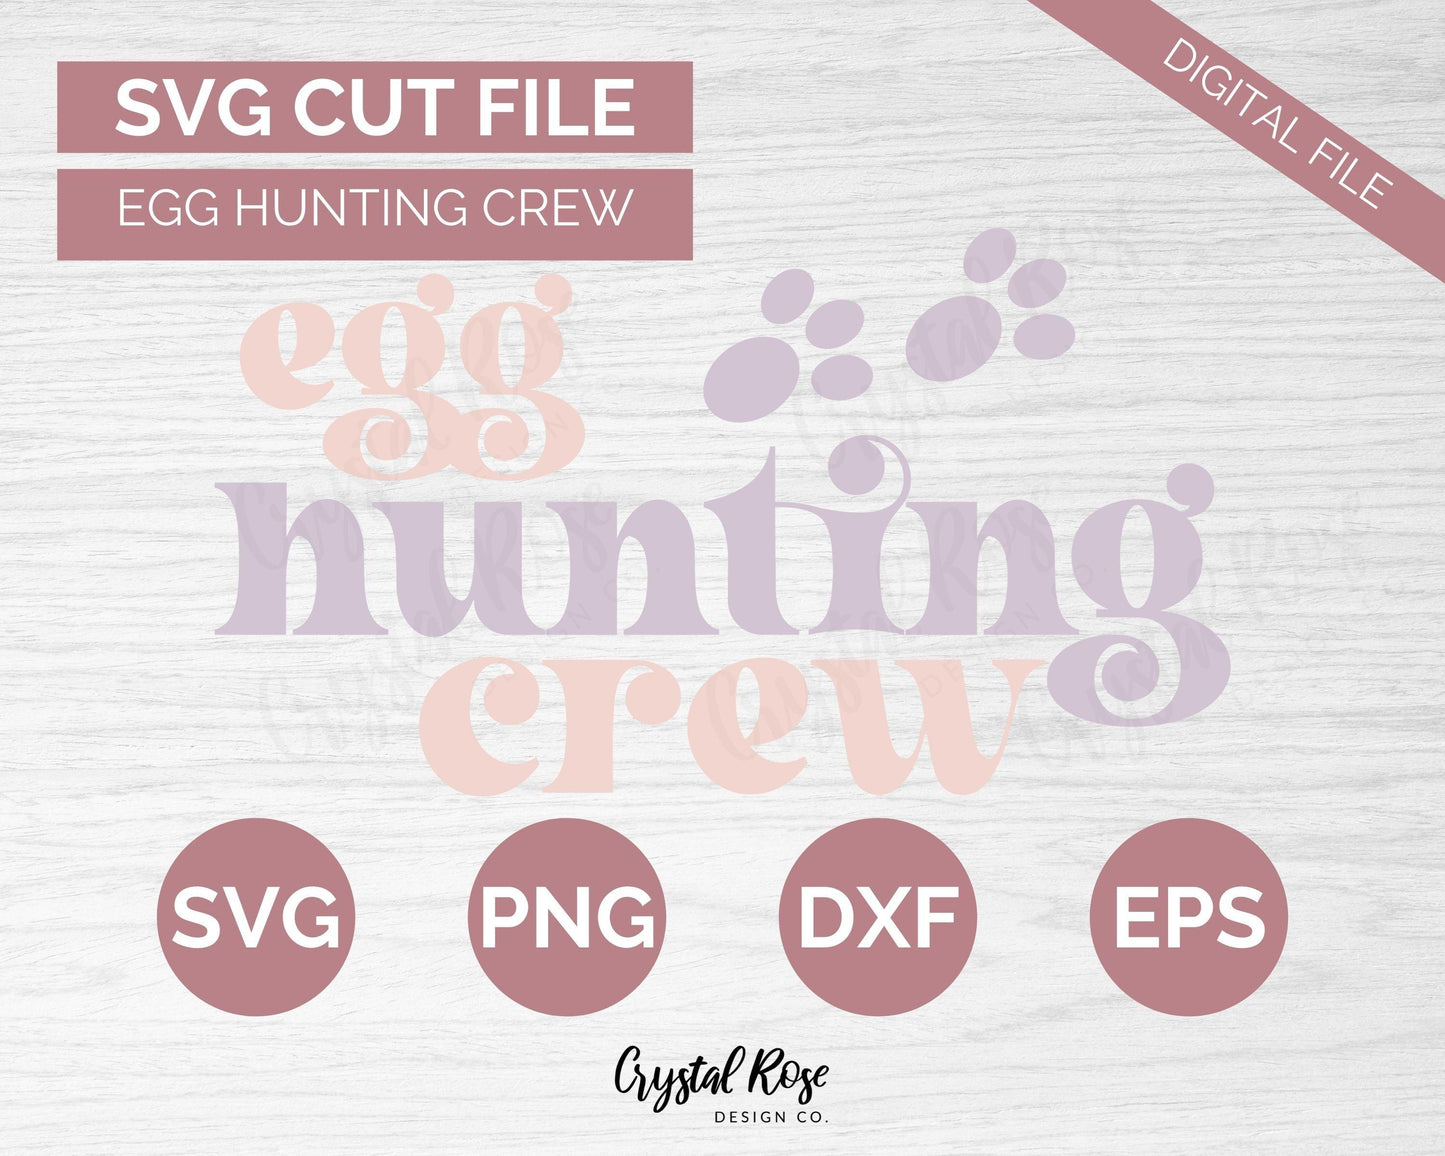 Egg Hunting Crew SVG, Easter SVG, Digital Download, Cricut, Silhouette, Glowforge (includes svg/png/dxf/eps)